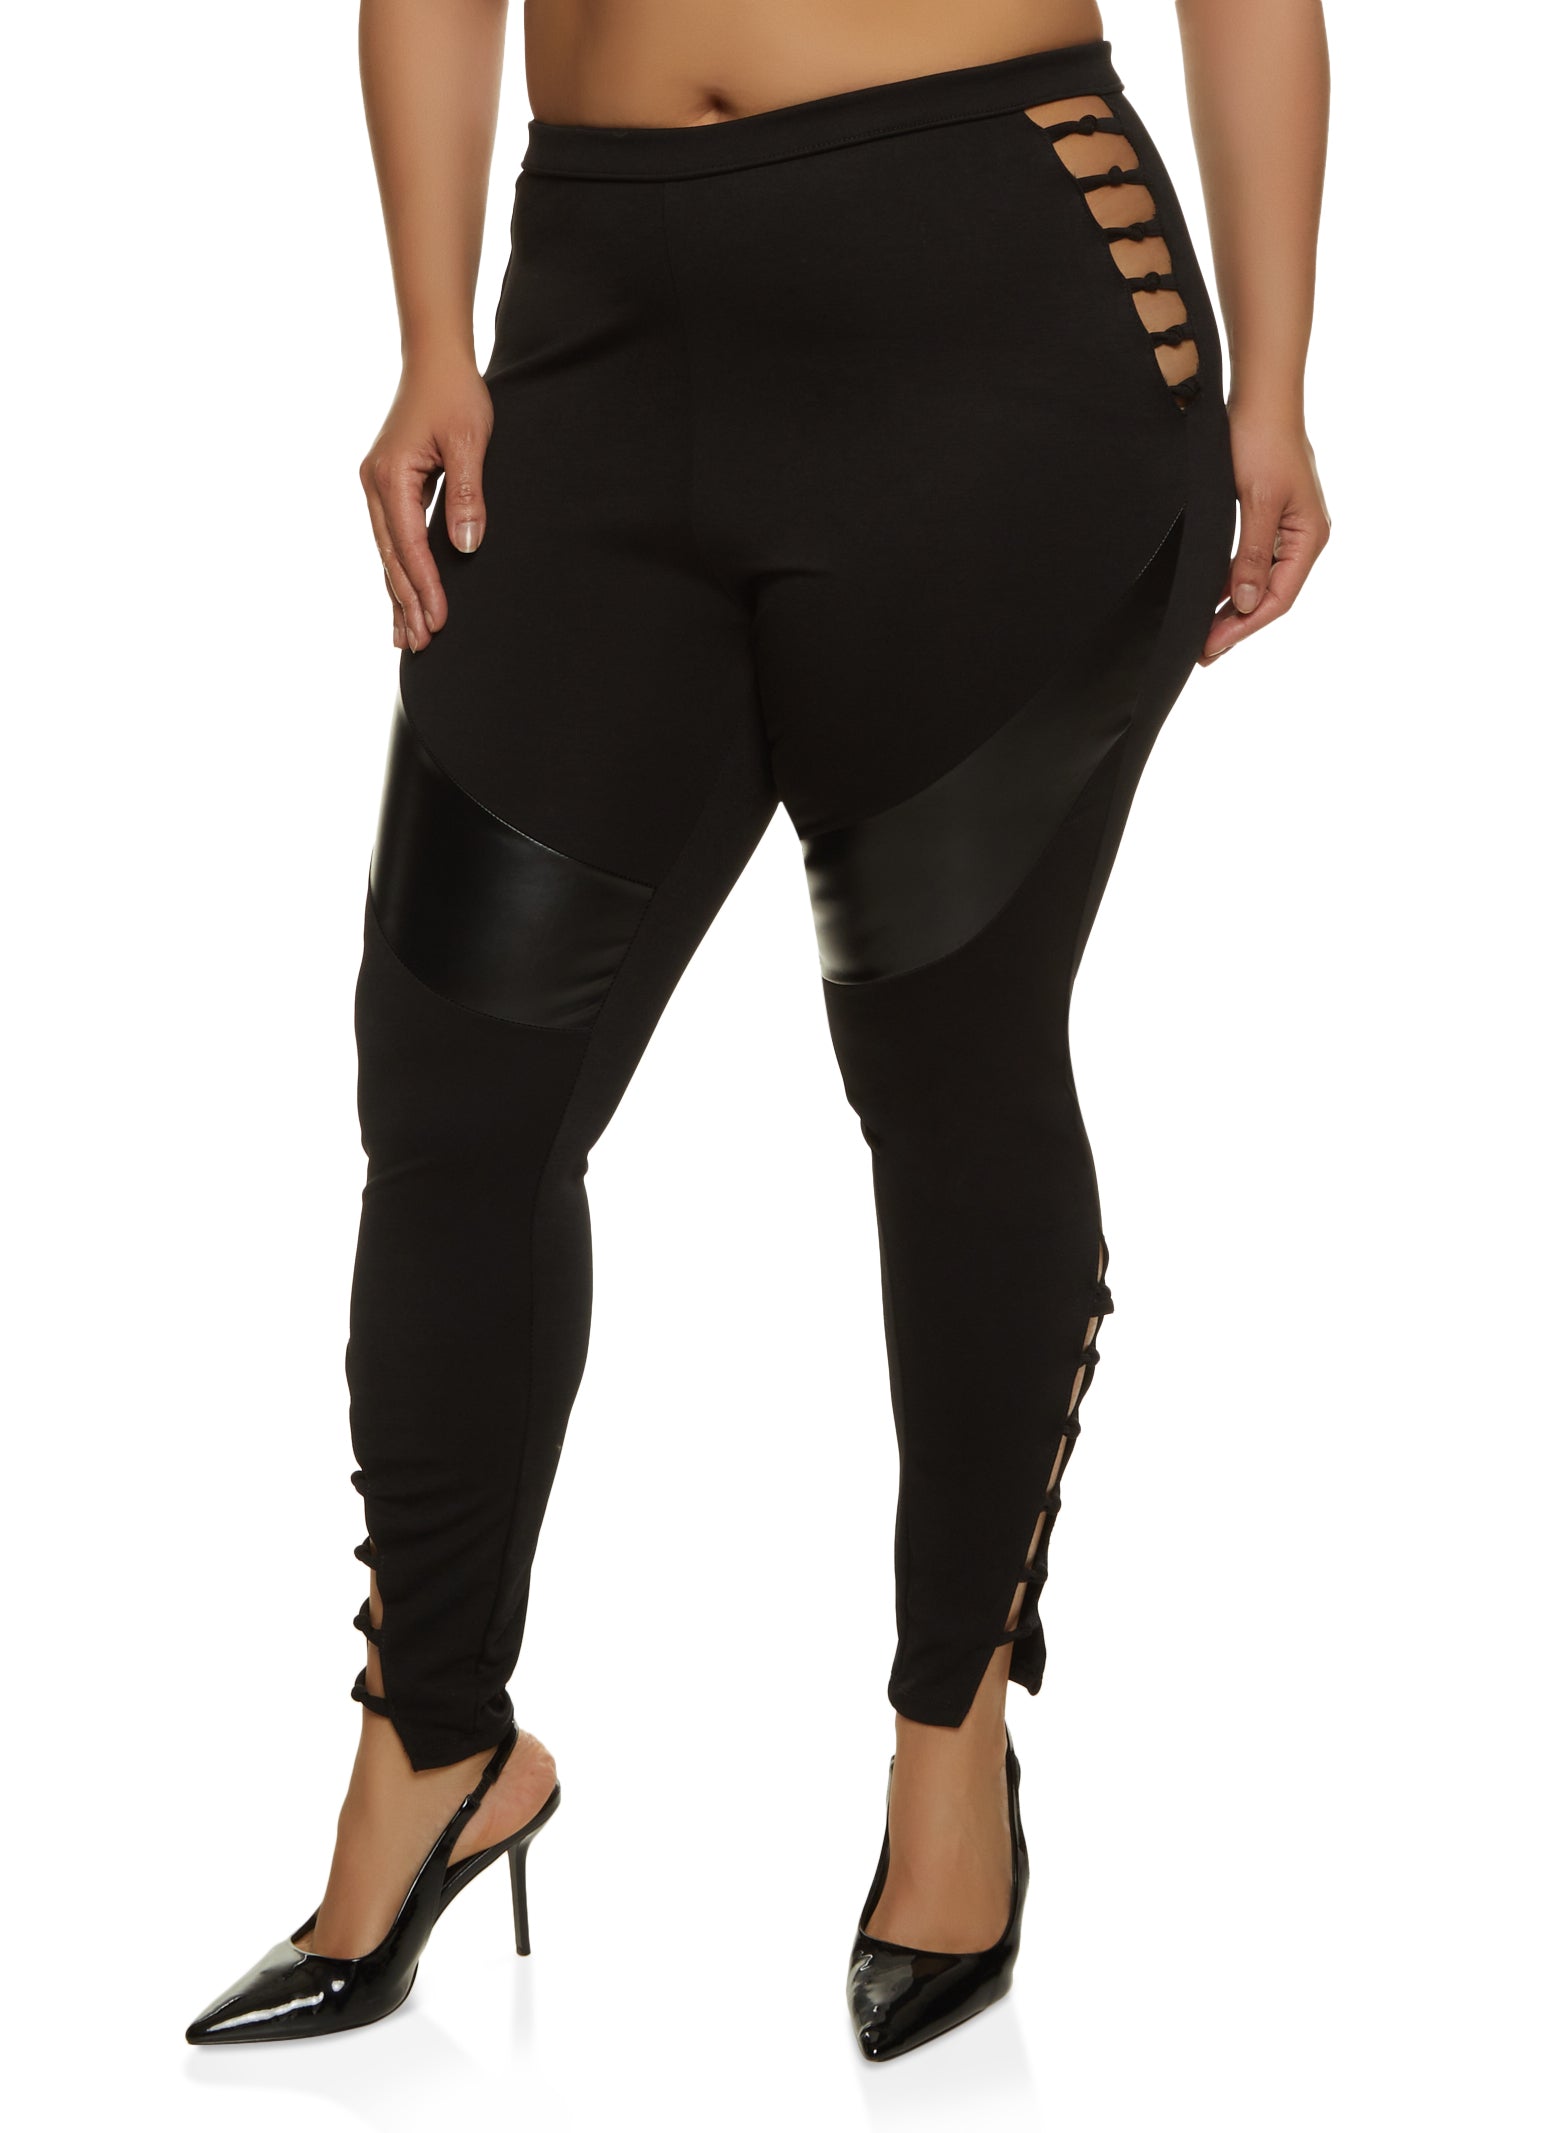 Black Lace Leggings Forever 21 | International Society of Precision  Agriculture